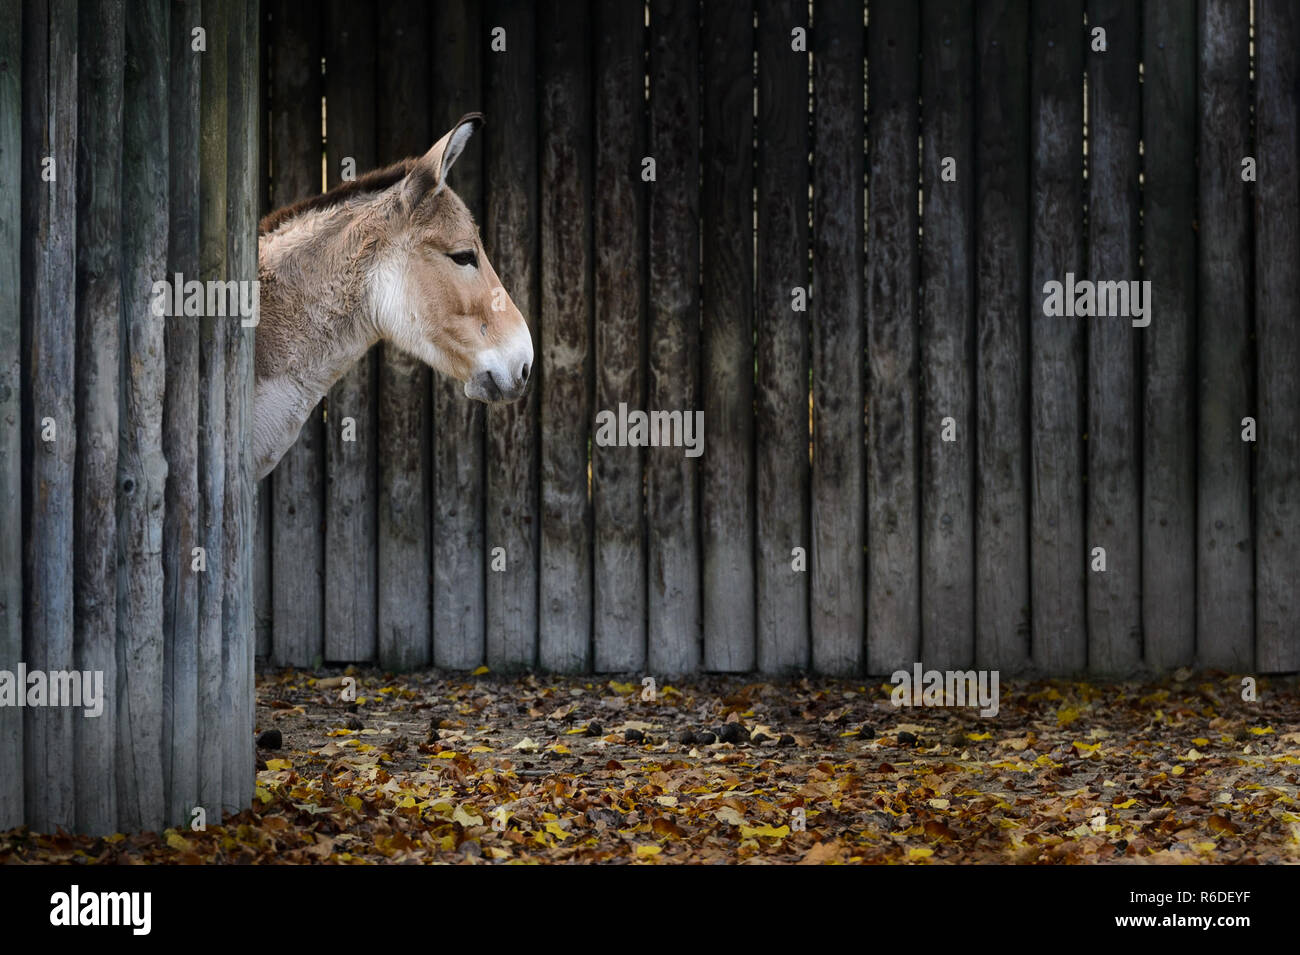 onager is in autumn leaves Stock Photo